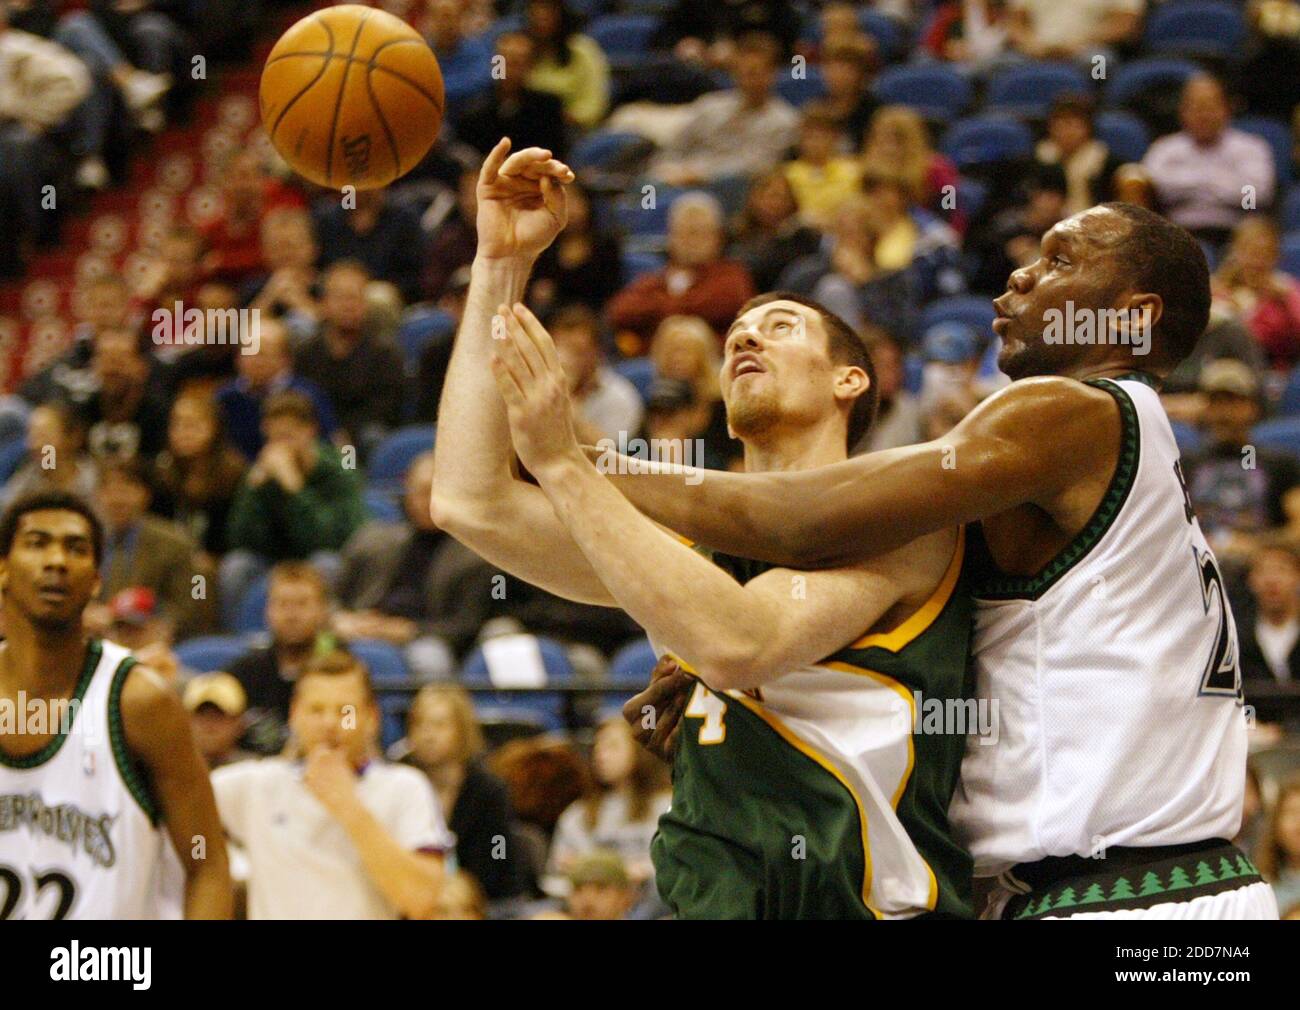 The Seattle SuperSonics Kevin Durant (35) drives around Minnesota  Timberwolves defender Ryan Gomes (8) during second half action. The Sonics  defeated the Timberwolves, 111-108, at the Target Center in Minneapolis,  Minnesota, Sunday